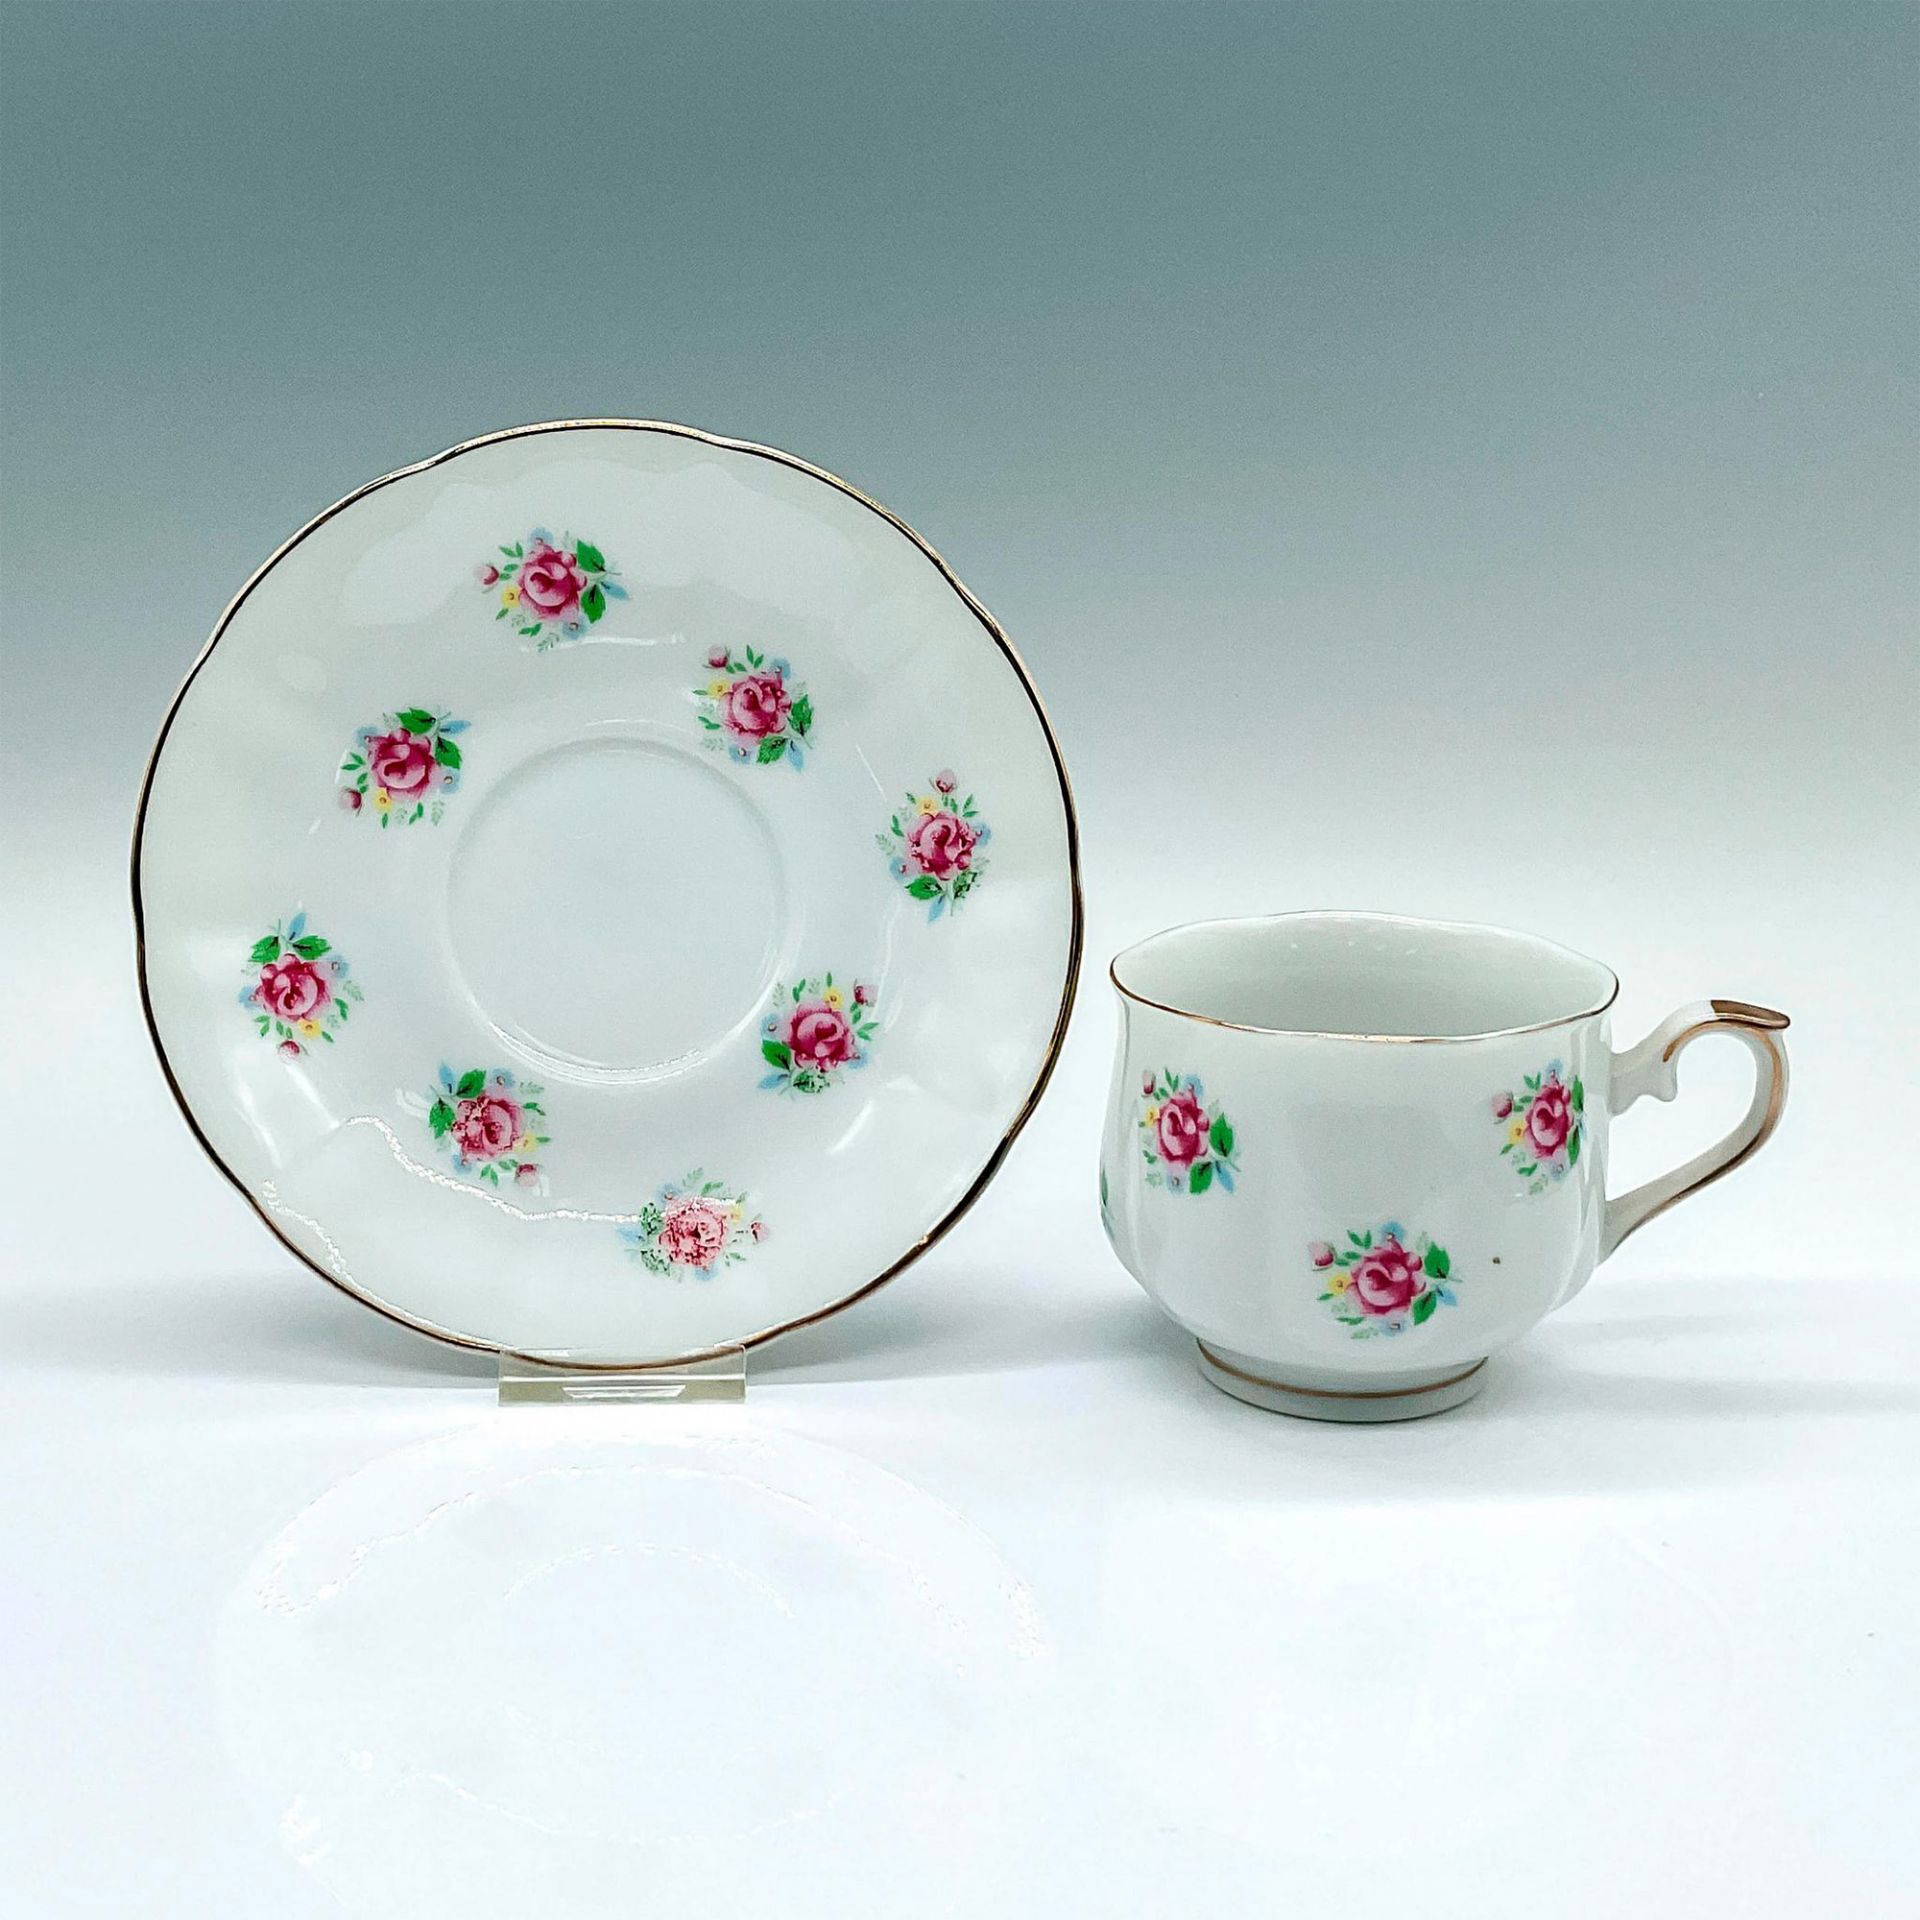 2pc Vintage FTD Japanese Porcelain Floral Cup and Saucer - Image 2 of 3